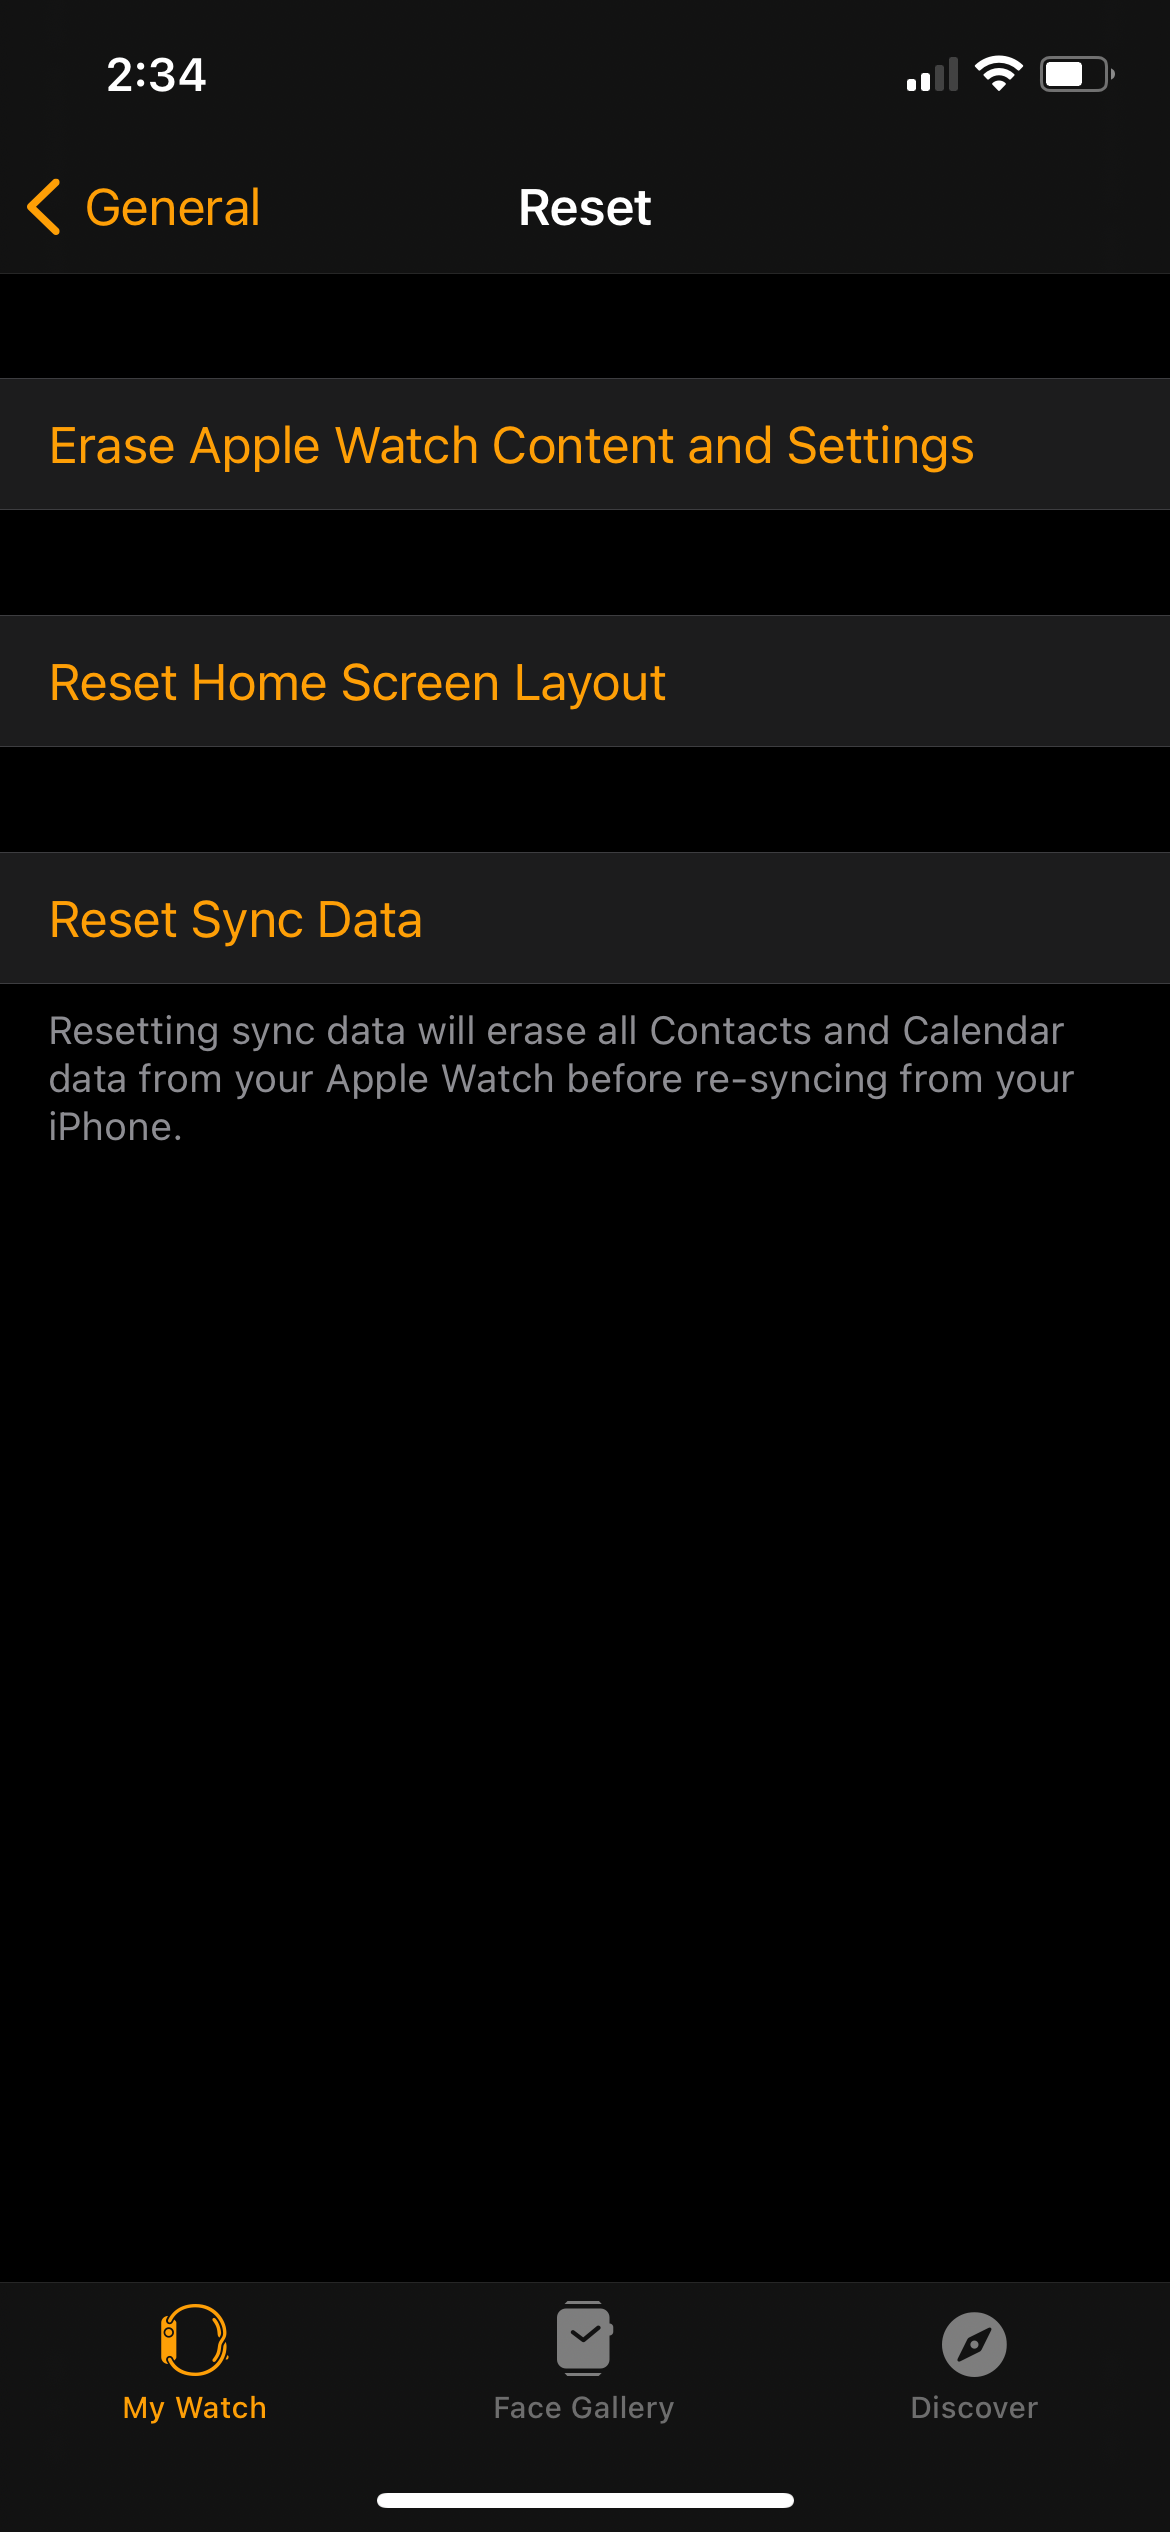 Erase Apple Watch Content from iPhone.